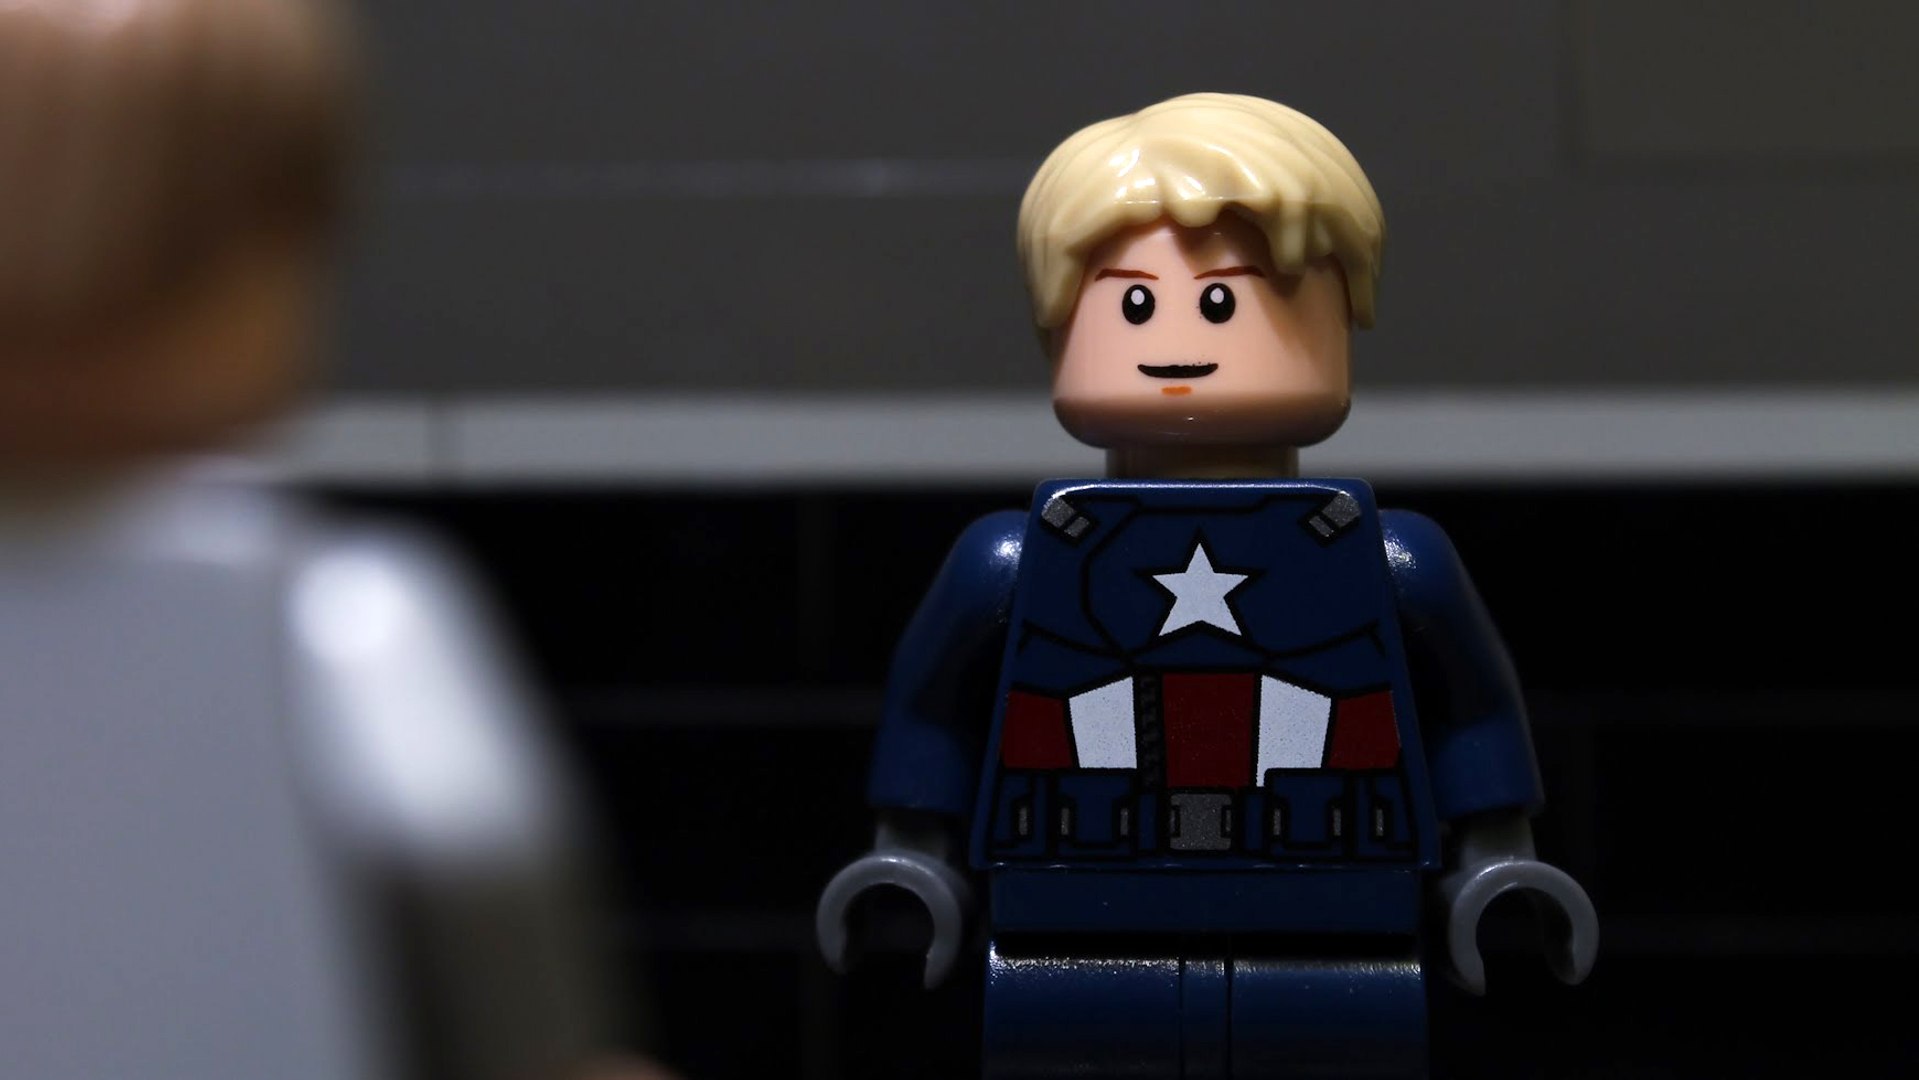 Lego Captain America The Winter Soldier Trailer #1 - video Dailymotion